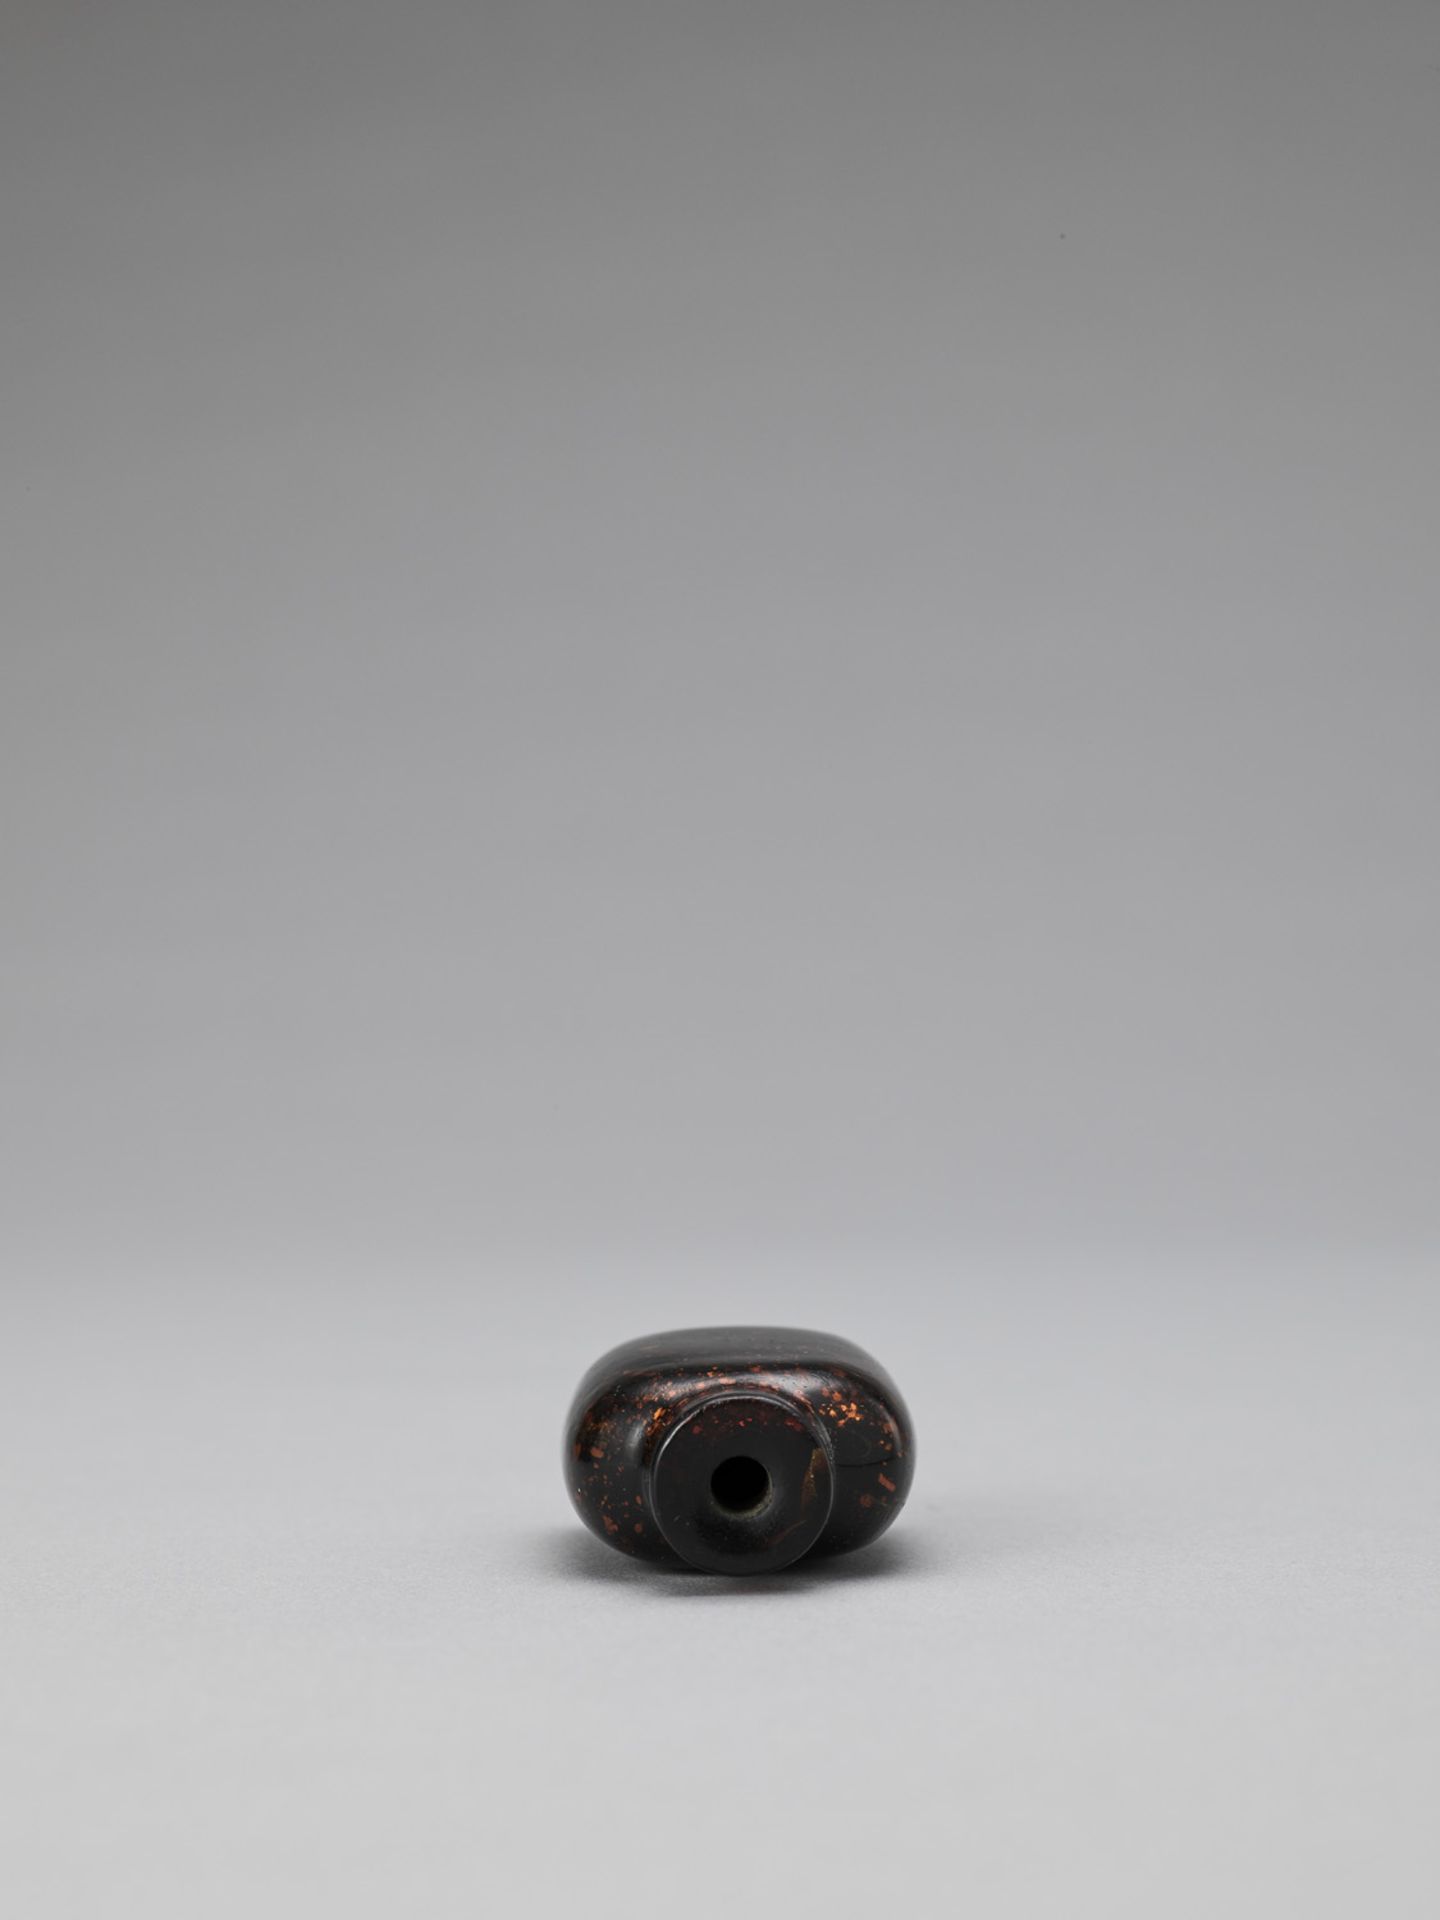 A GOLD-SPECKLED AMBER AVENTURINE GLASS SNUFF BOTTLE, QING - Image 5 of 6